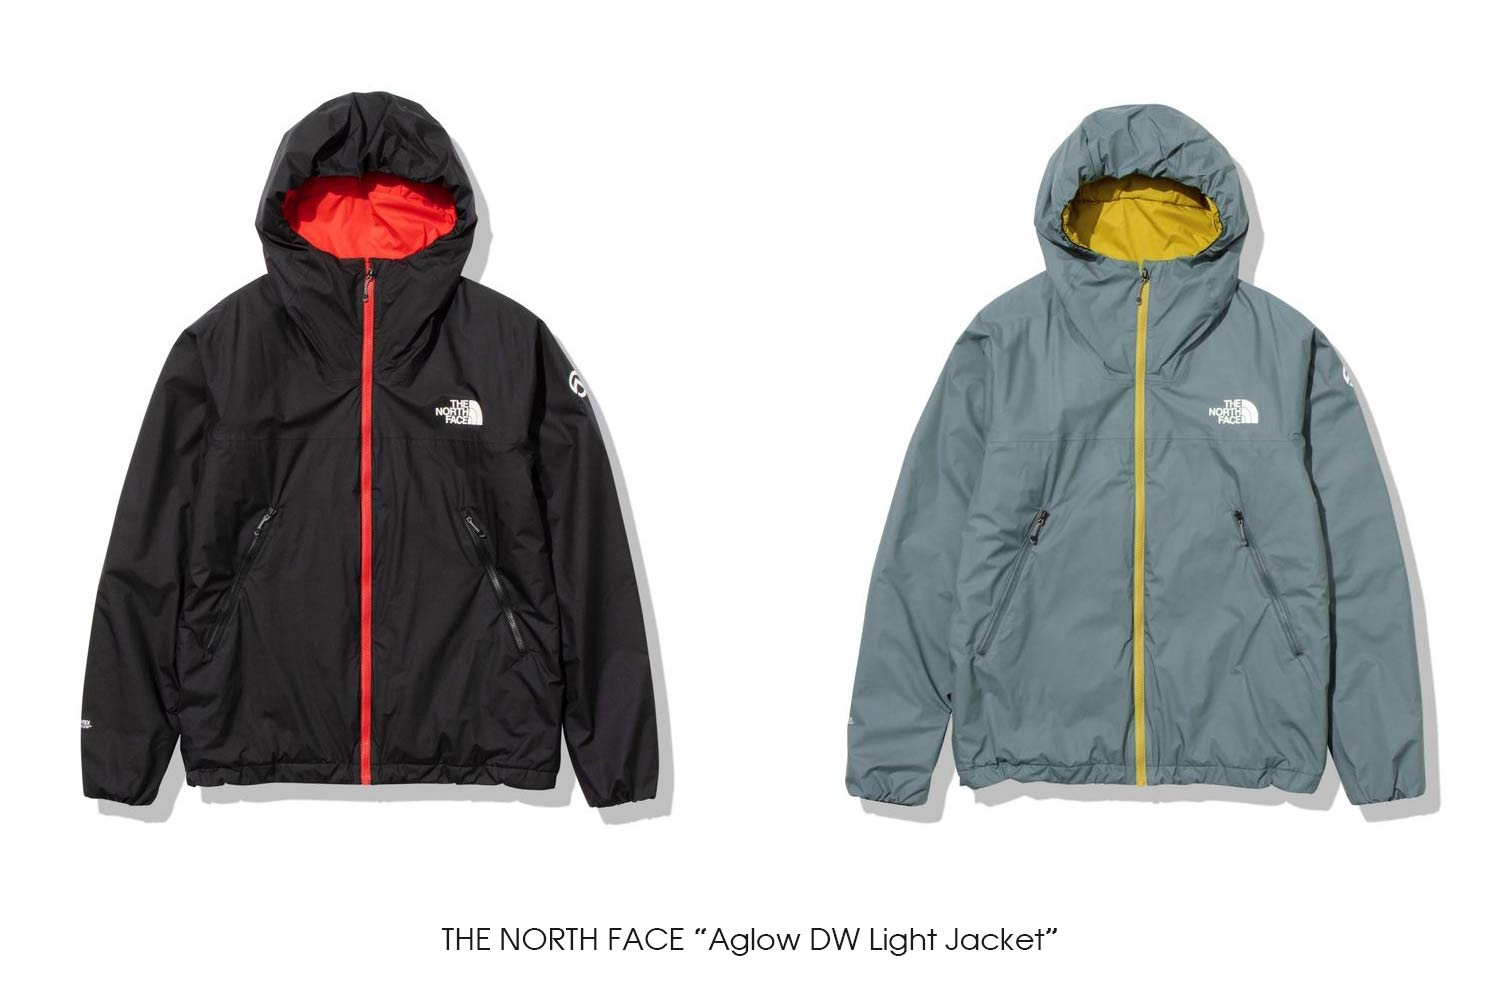 THE NORTH FACE "Aglow DW Light Jacket"